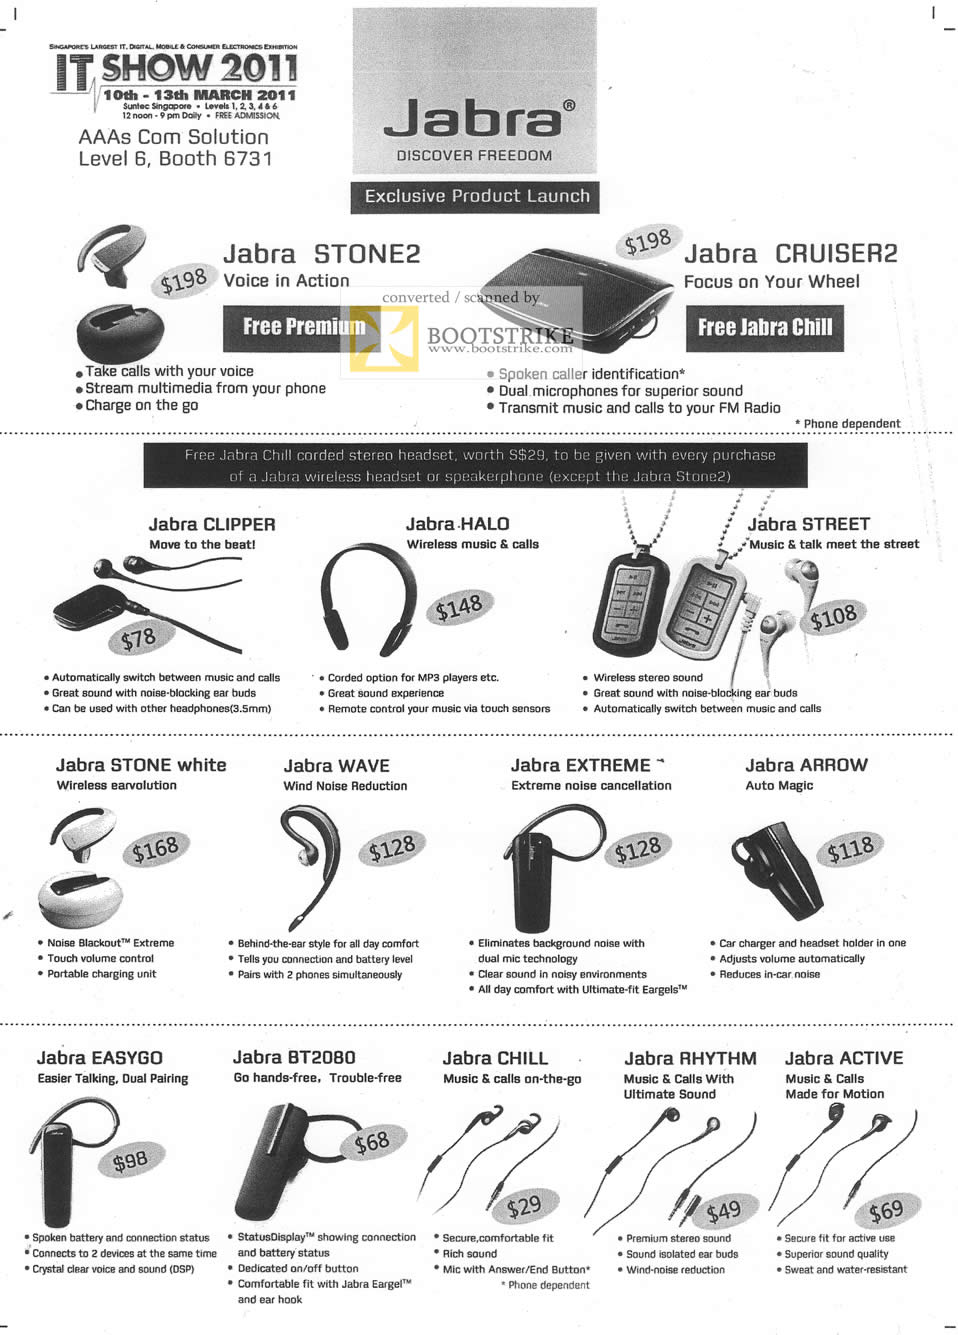 IT Show 2011 price list image brochure of AAAs Com Jabra Stone2 Cruiser2 Clipper Halo Street White Wave Extreme Arrow Easygo BT2080 Chill Rhythm Active